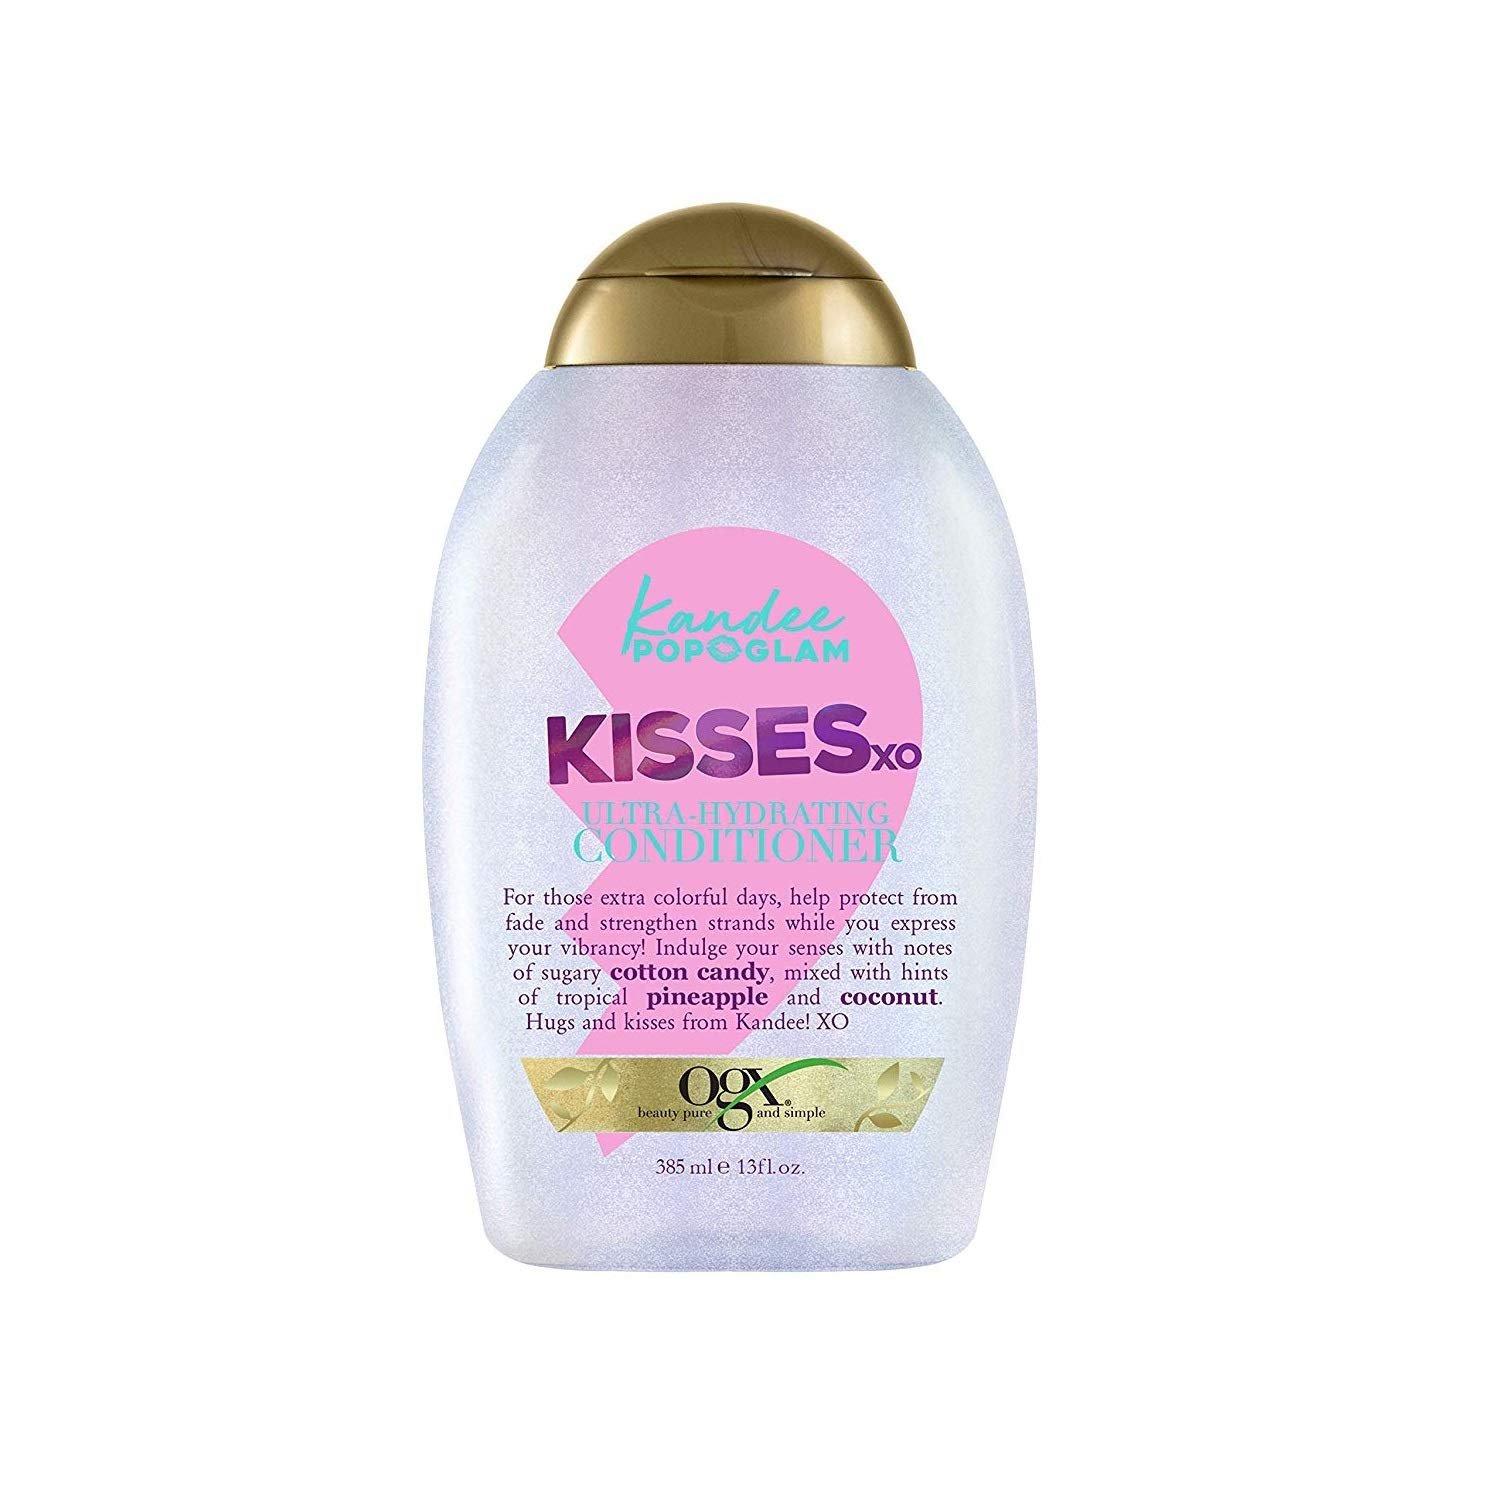 Ogx Kandee Johnson Hugs and Kisses Conditioner